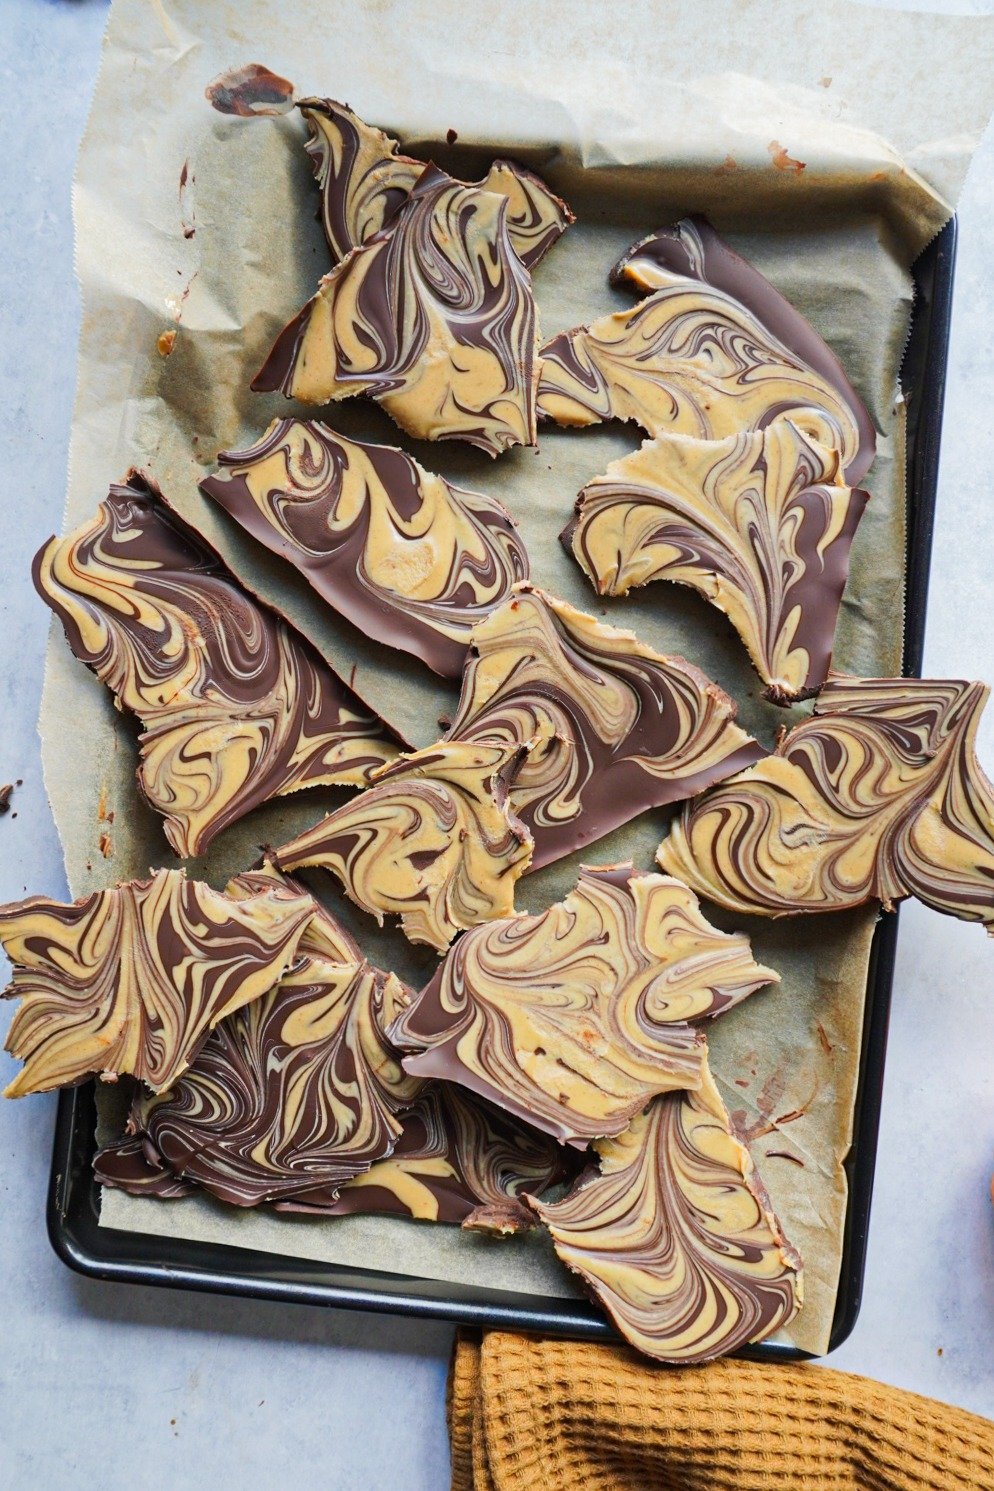 Easy To Make Homemade Chocolate Bark with peanut butter